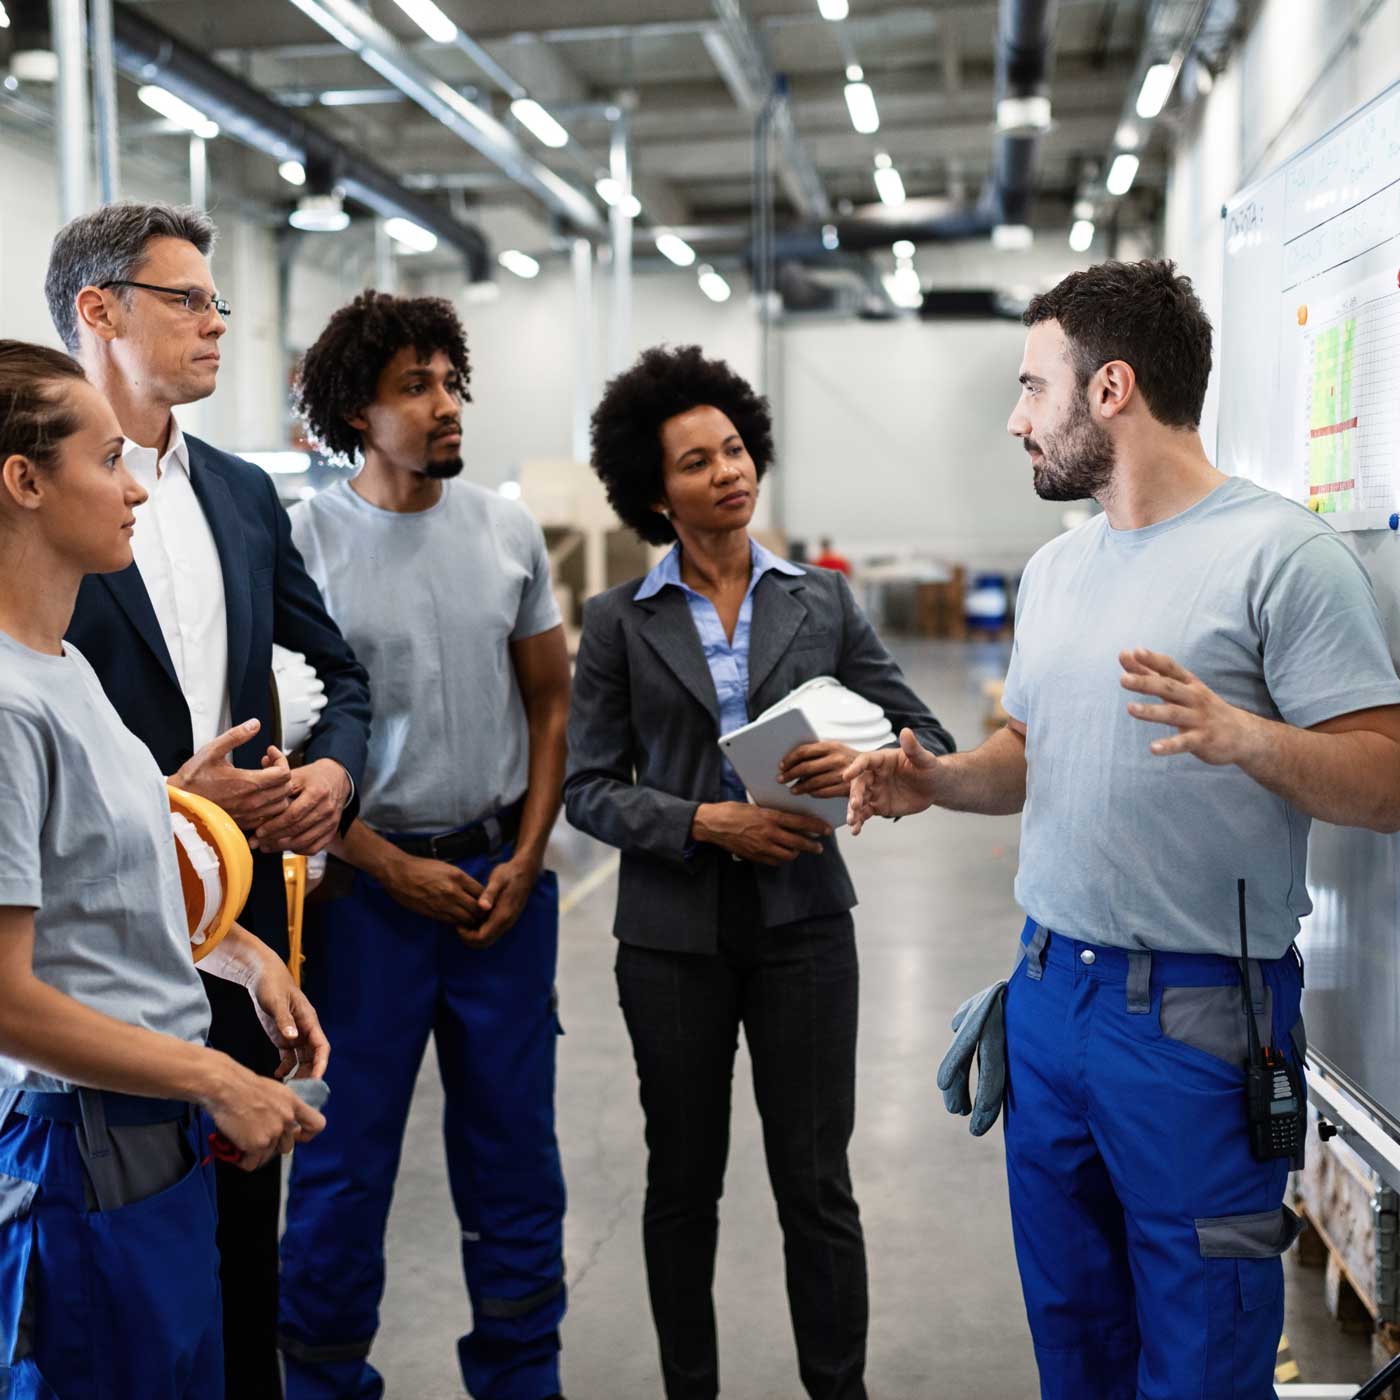 A group of workers in a warehouse having a standing meeting.